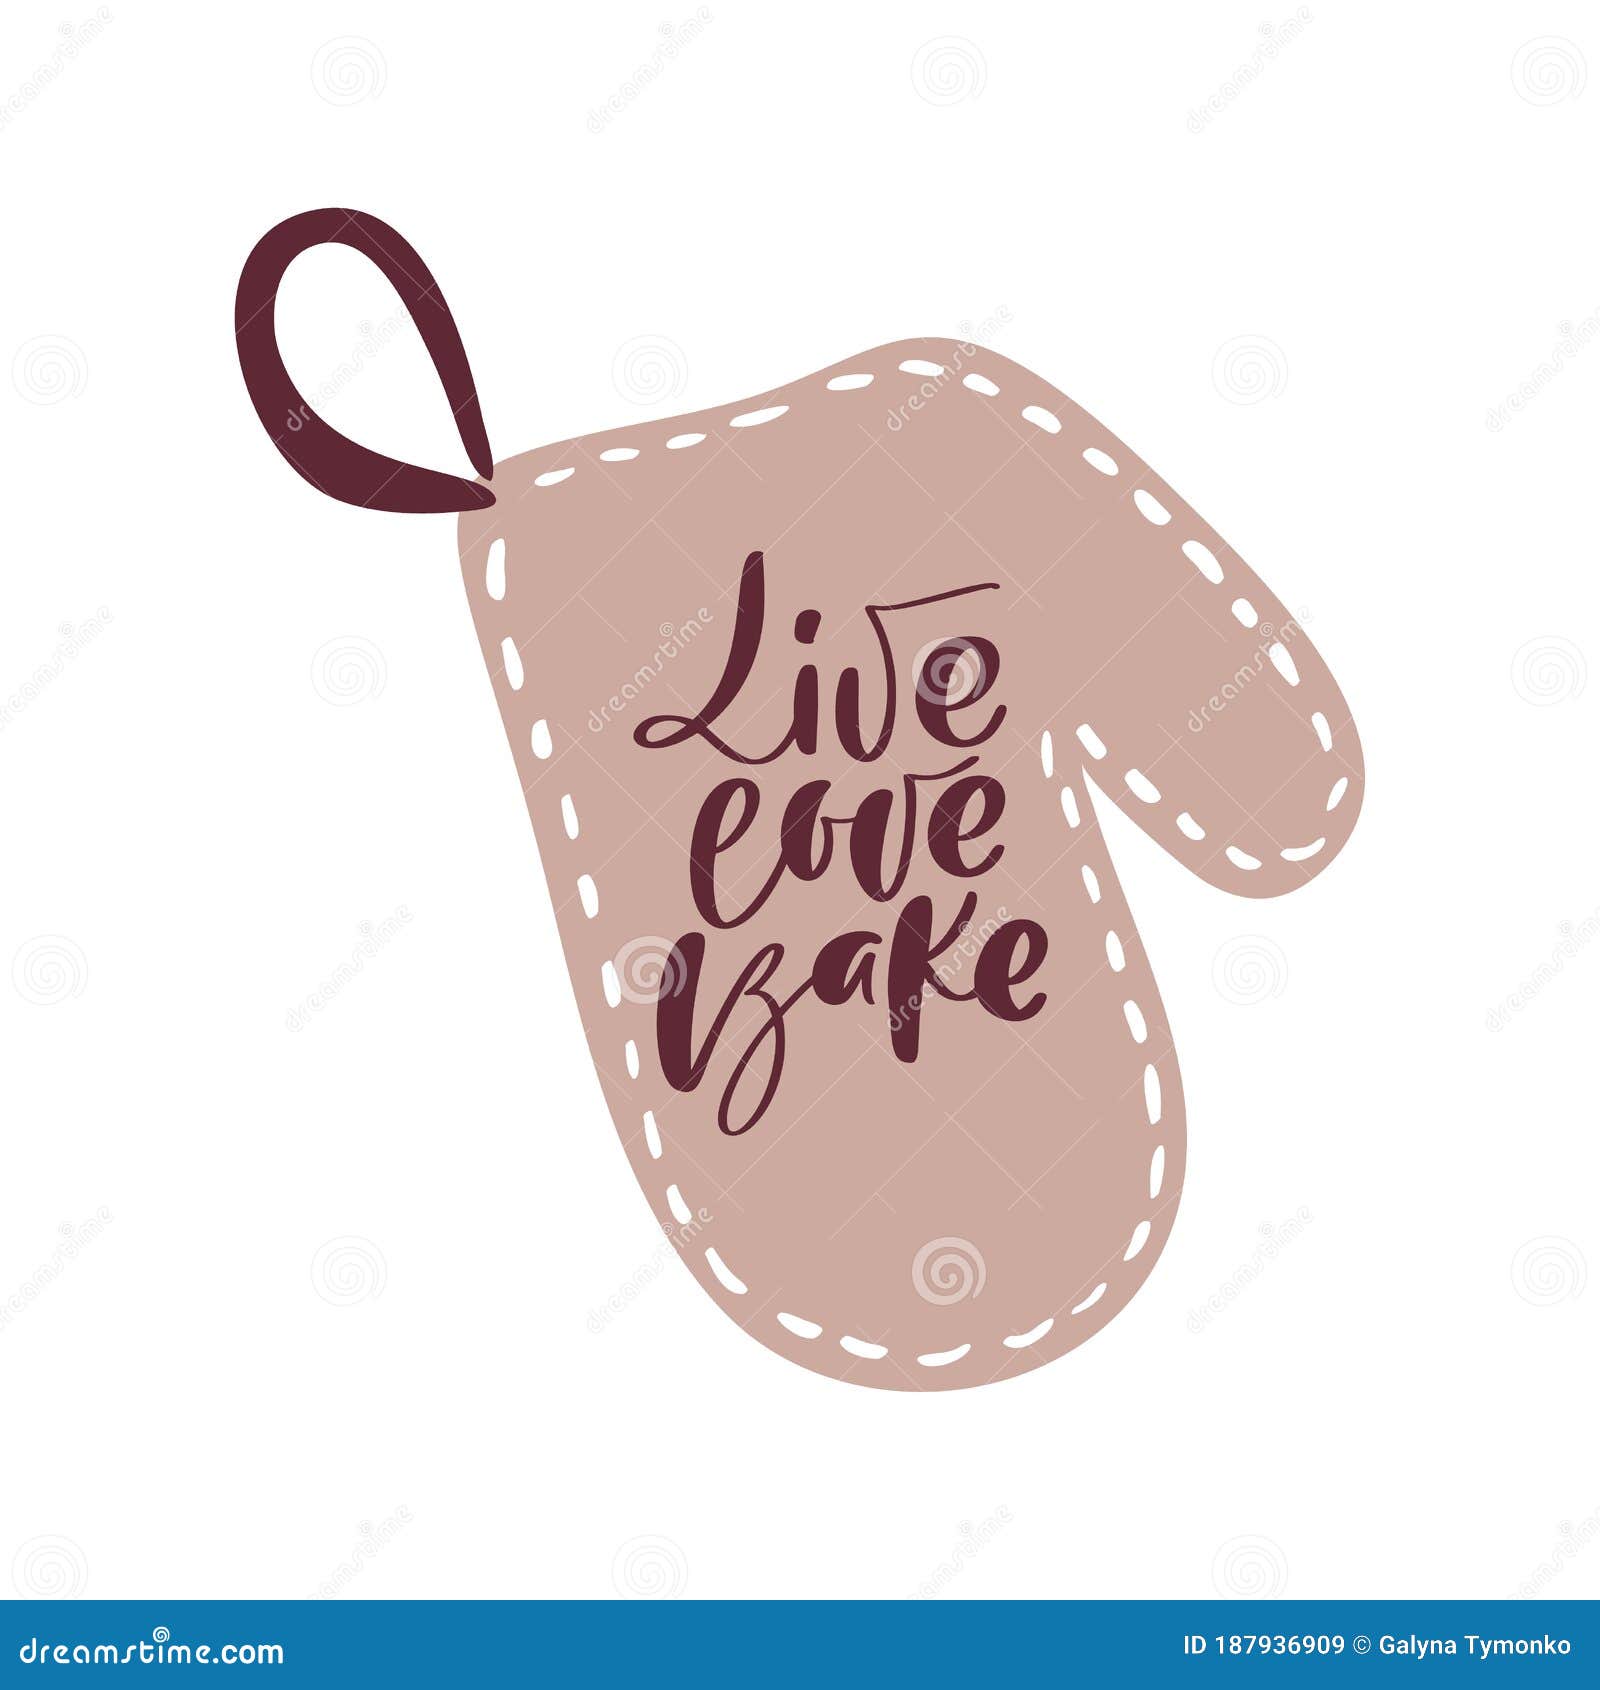 https://thumbs.dreamstime.com/z/live-love-bake-hand-draw-calligraphy-text-kitchen-potholders-vector-white-isolated-logo-positive-handwritting-rule-lettering-187936909.jpg